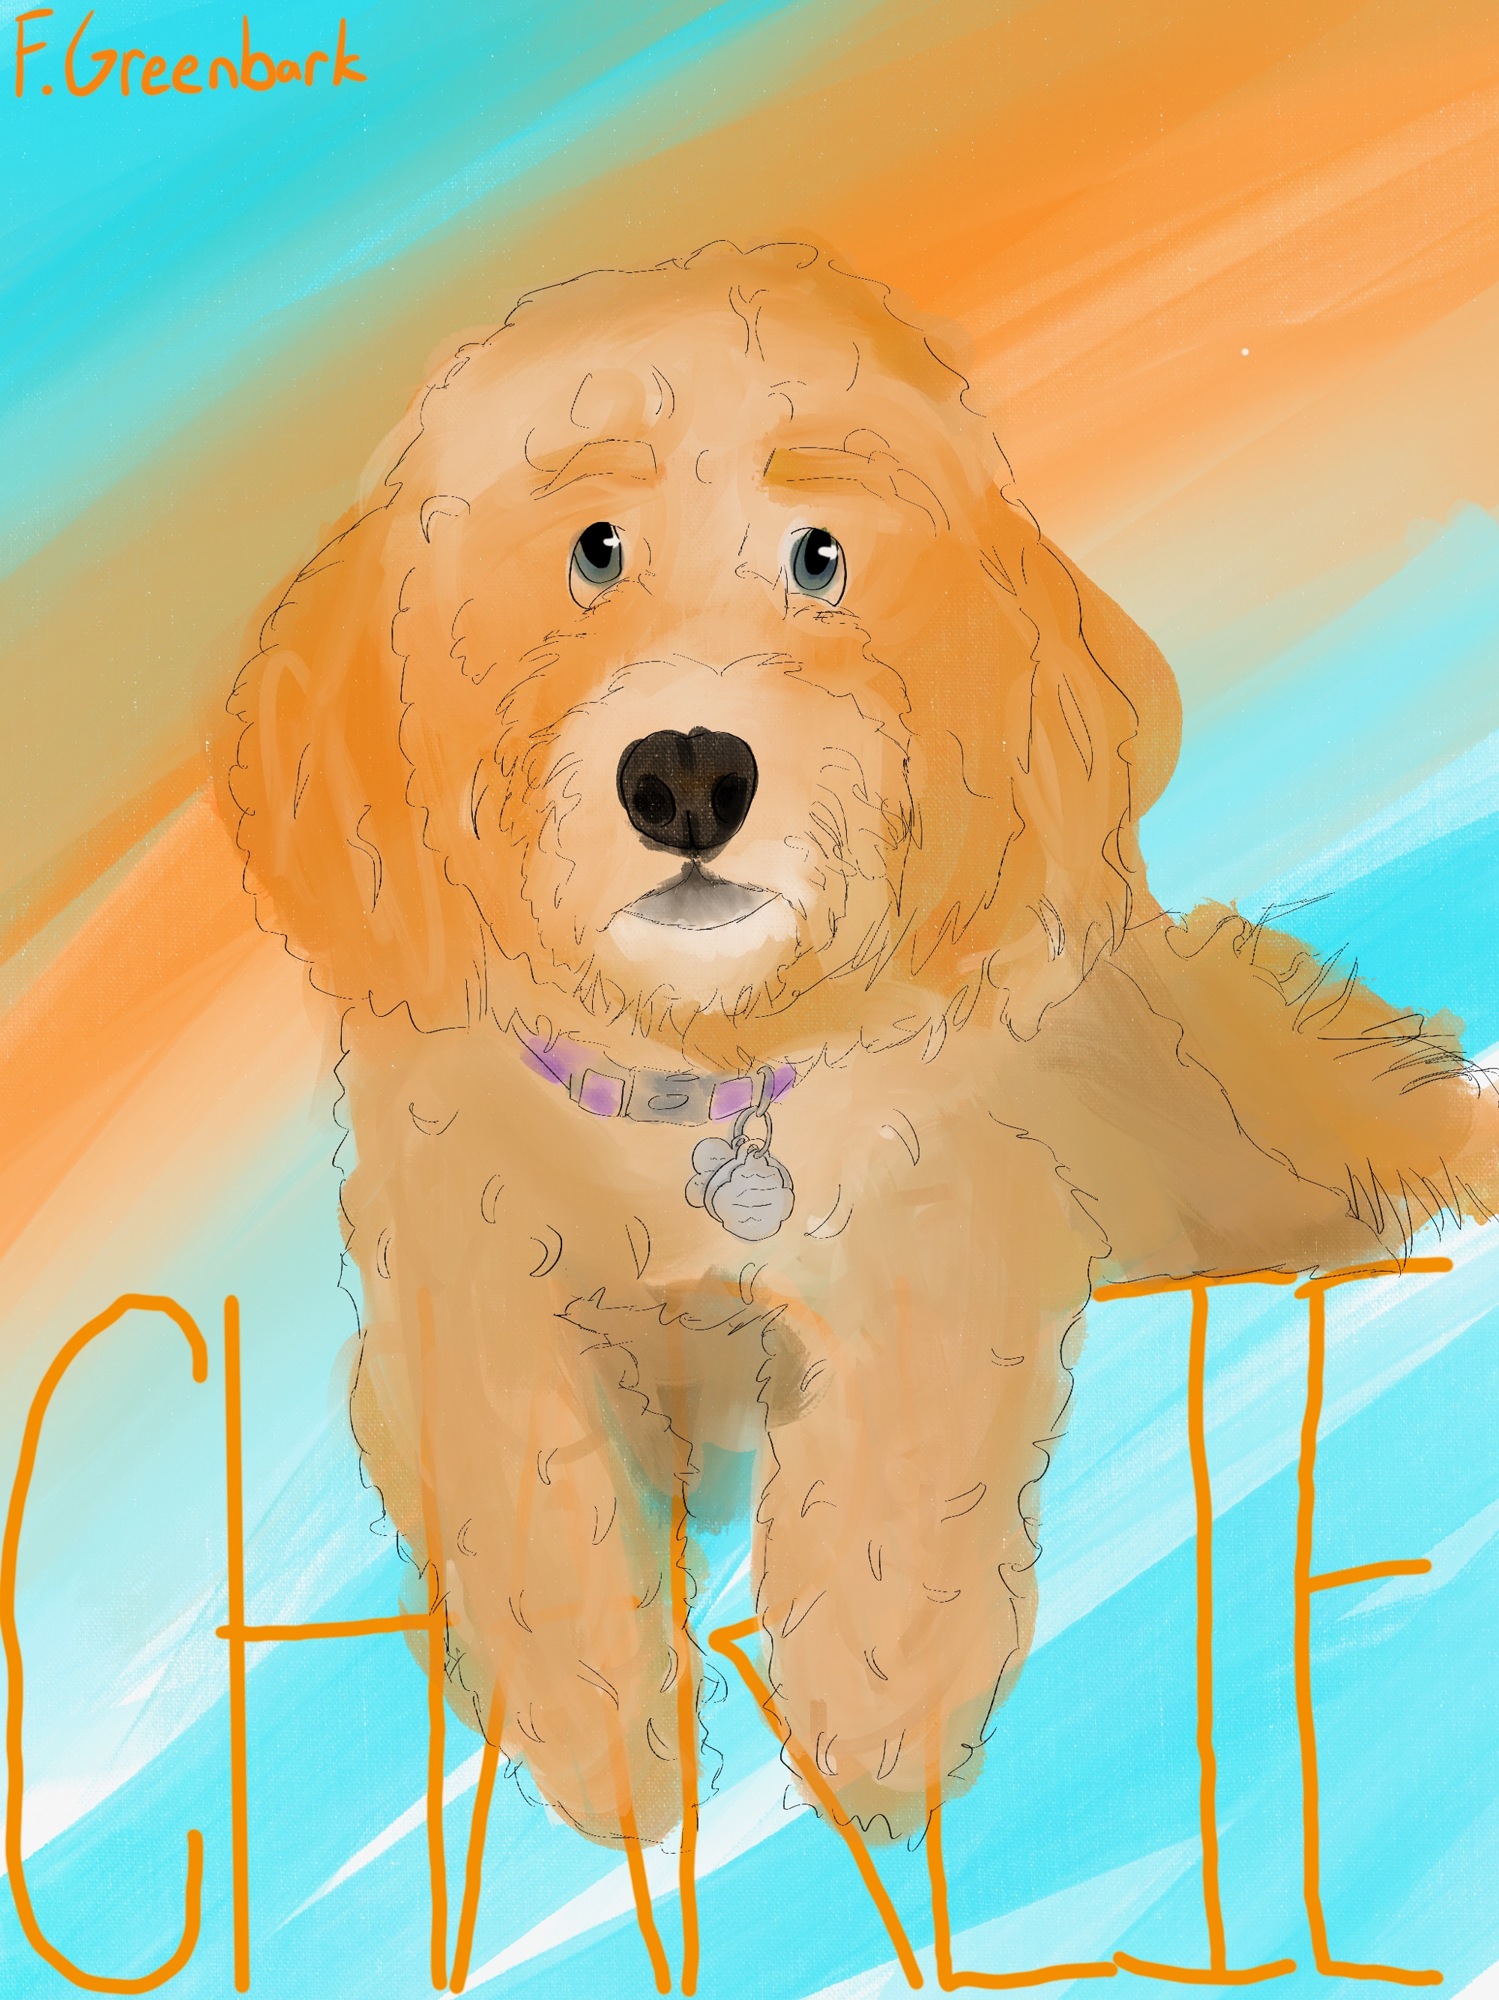 Francesca Bisordi said the most difficult part of drawing Charlie was his blond fur. She said there is not a color that easily corresponds to such fur, so she plays around and mixes shades until she's satisfied.